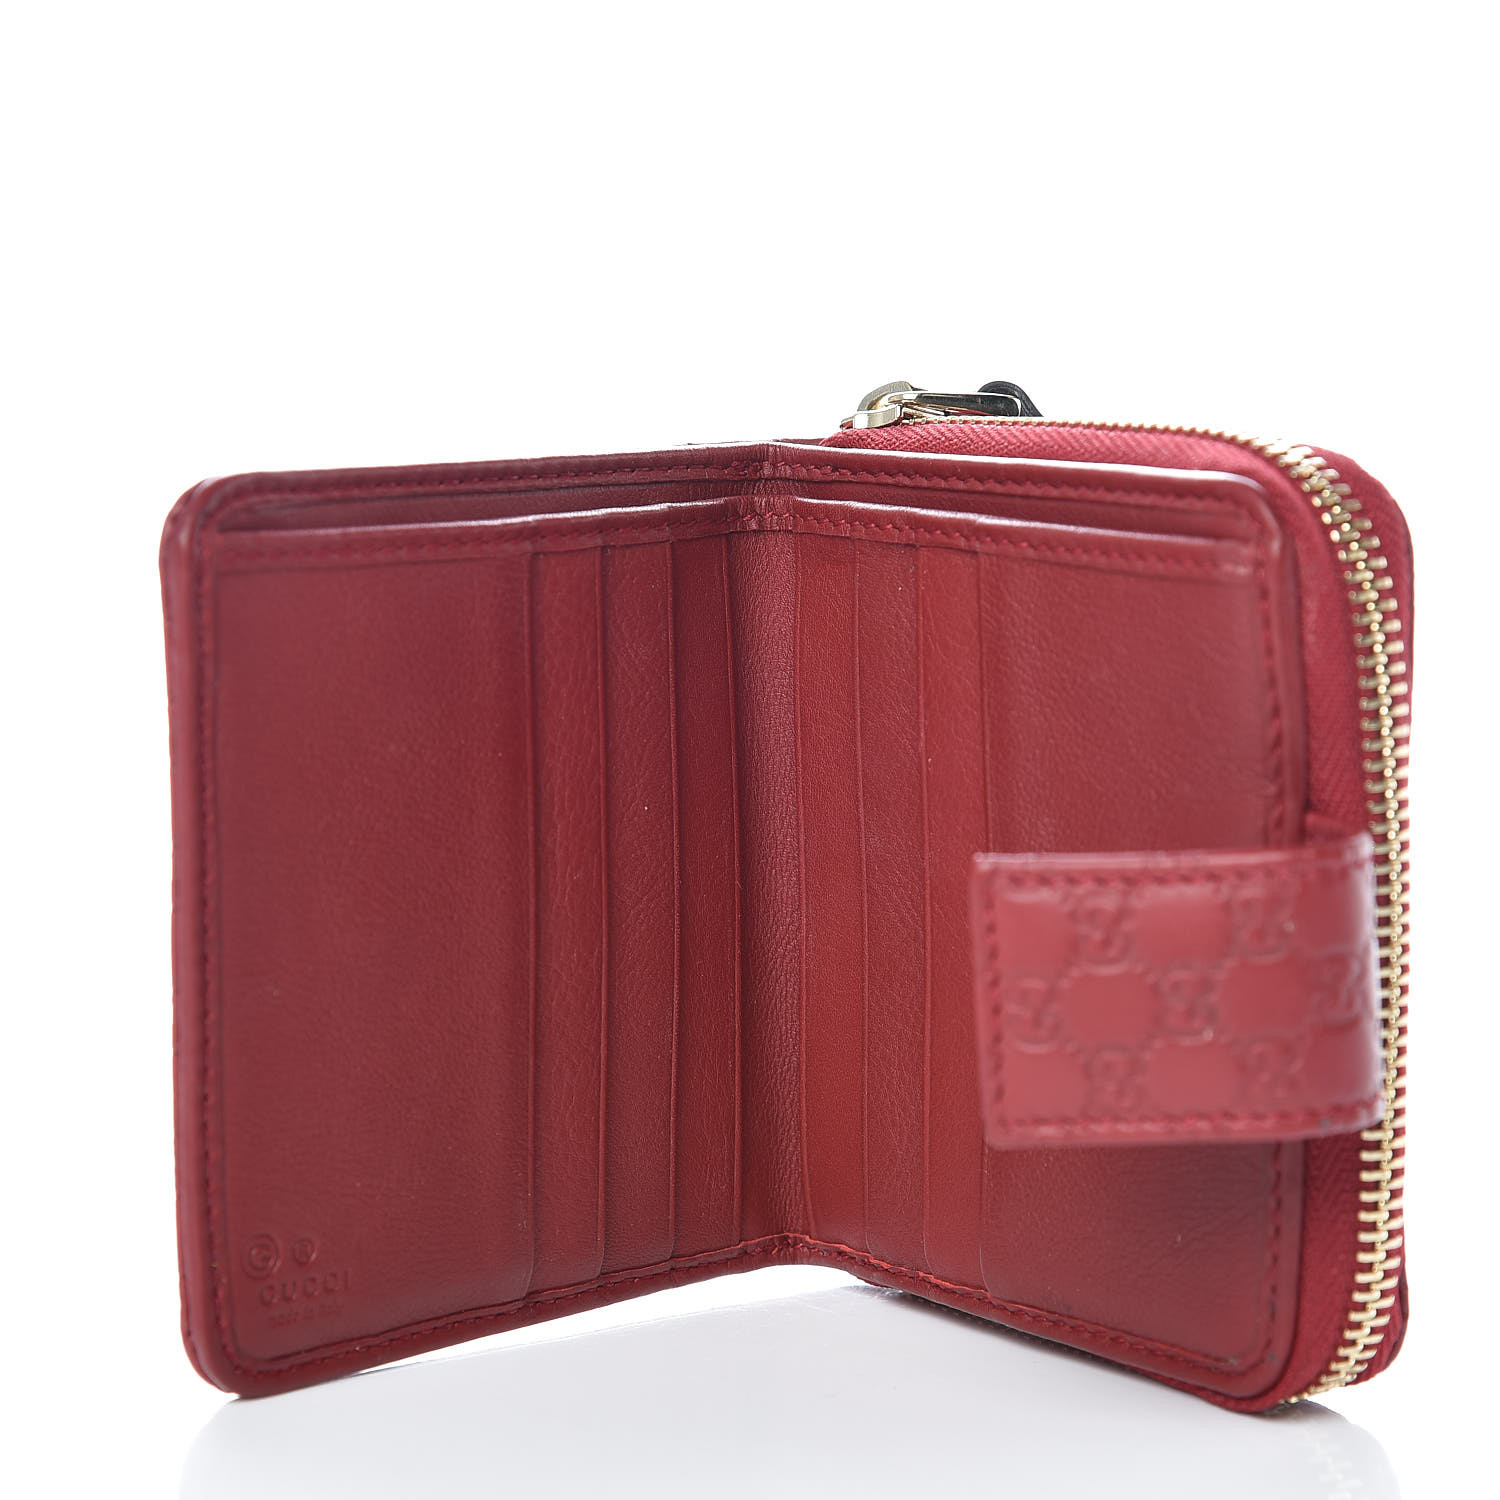 GUCCI Microguccissima Compact Wallet Red 393595